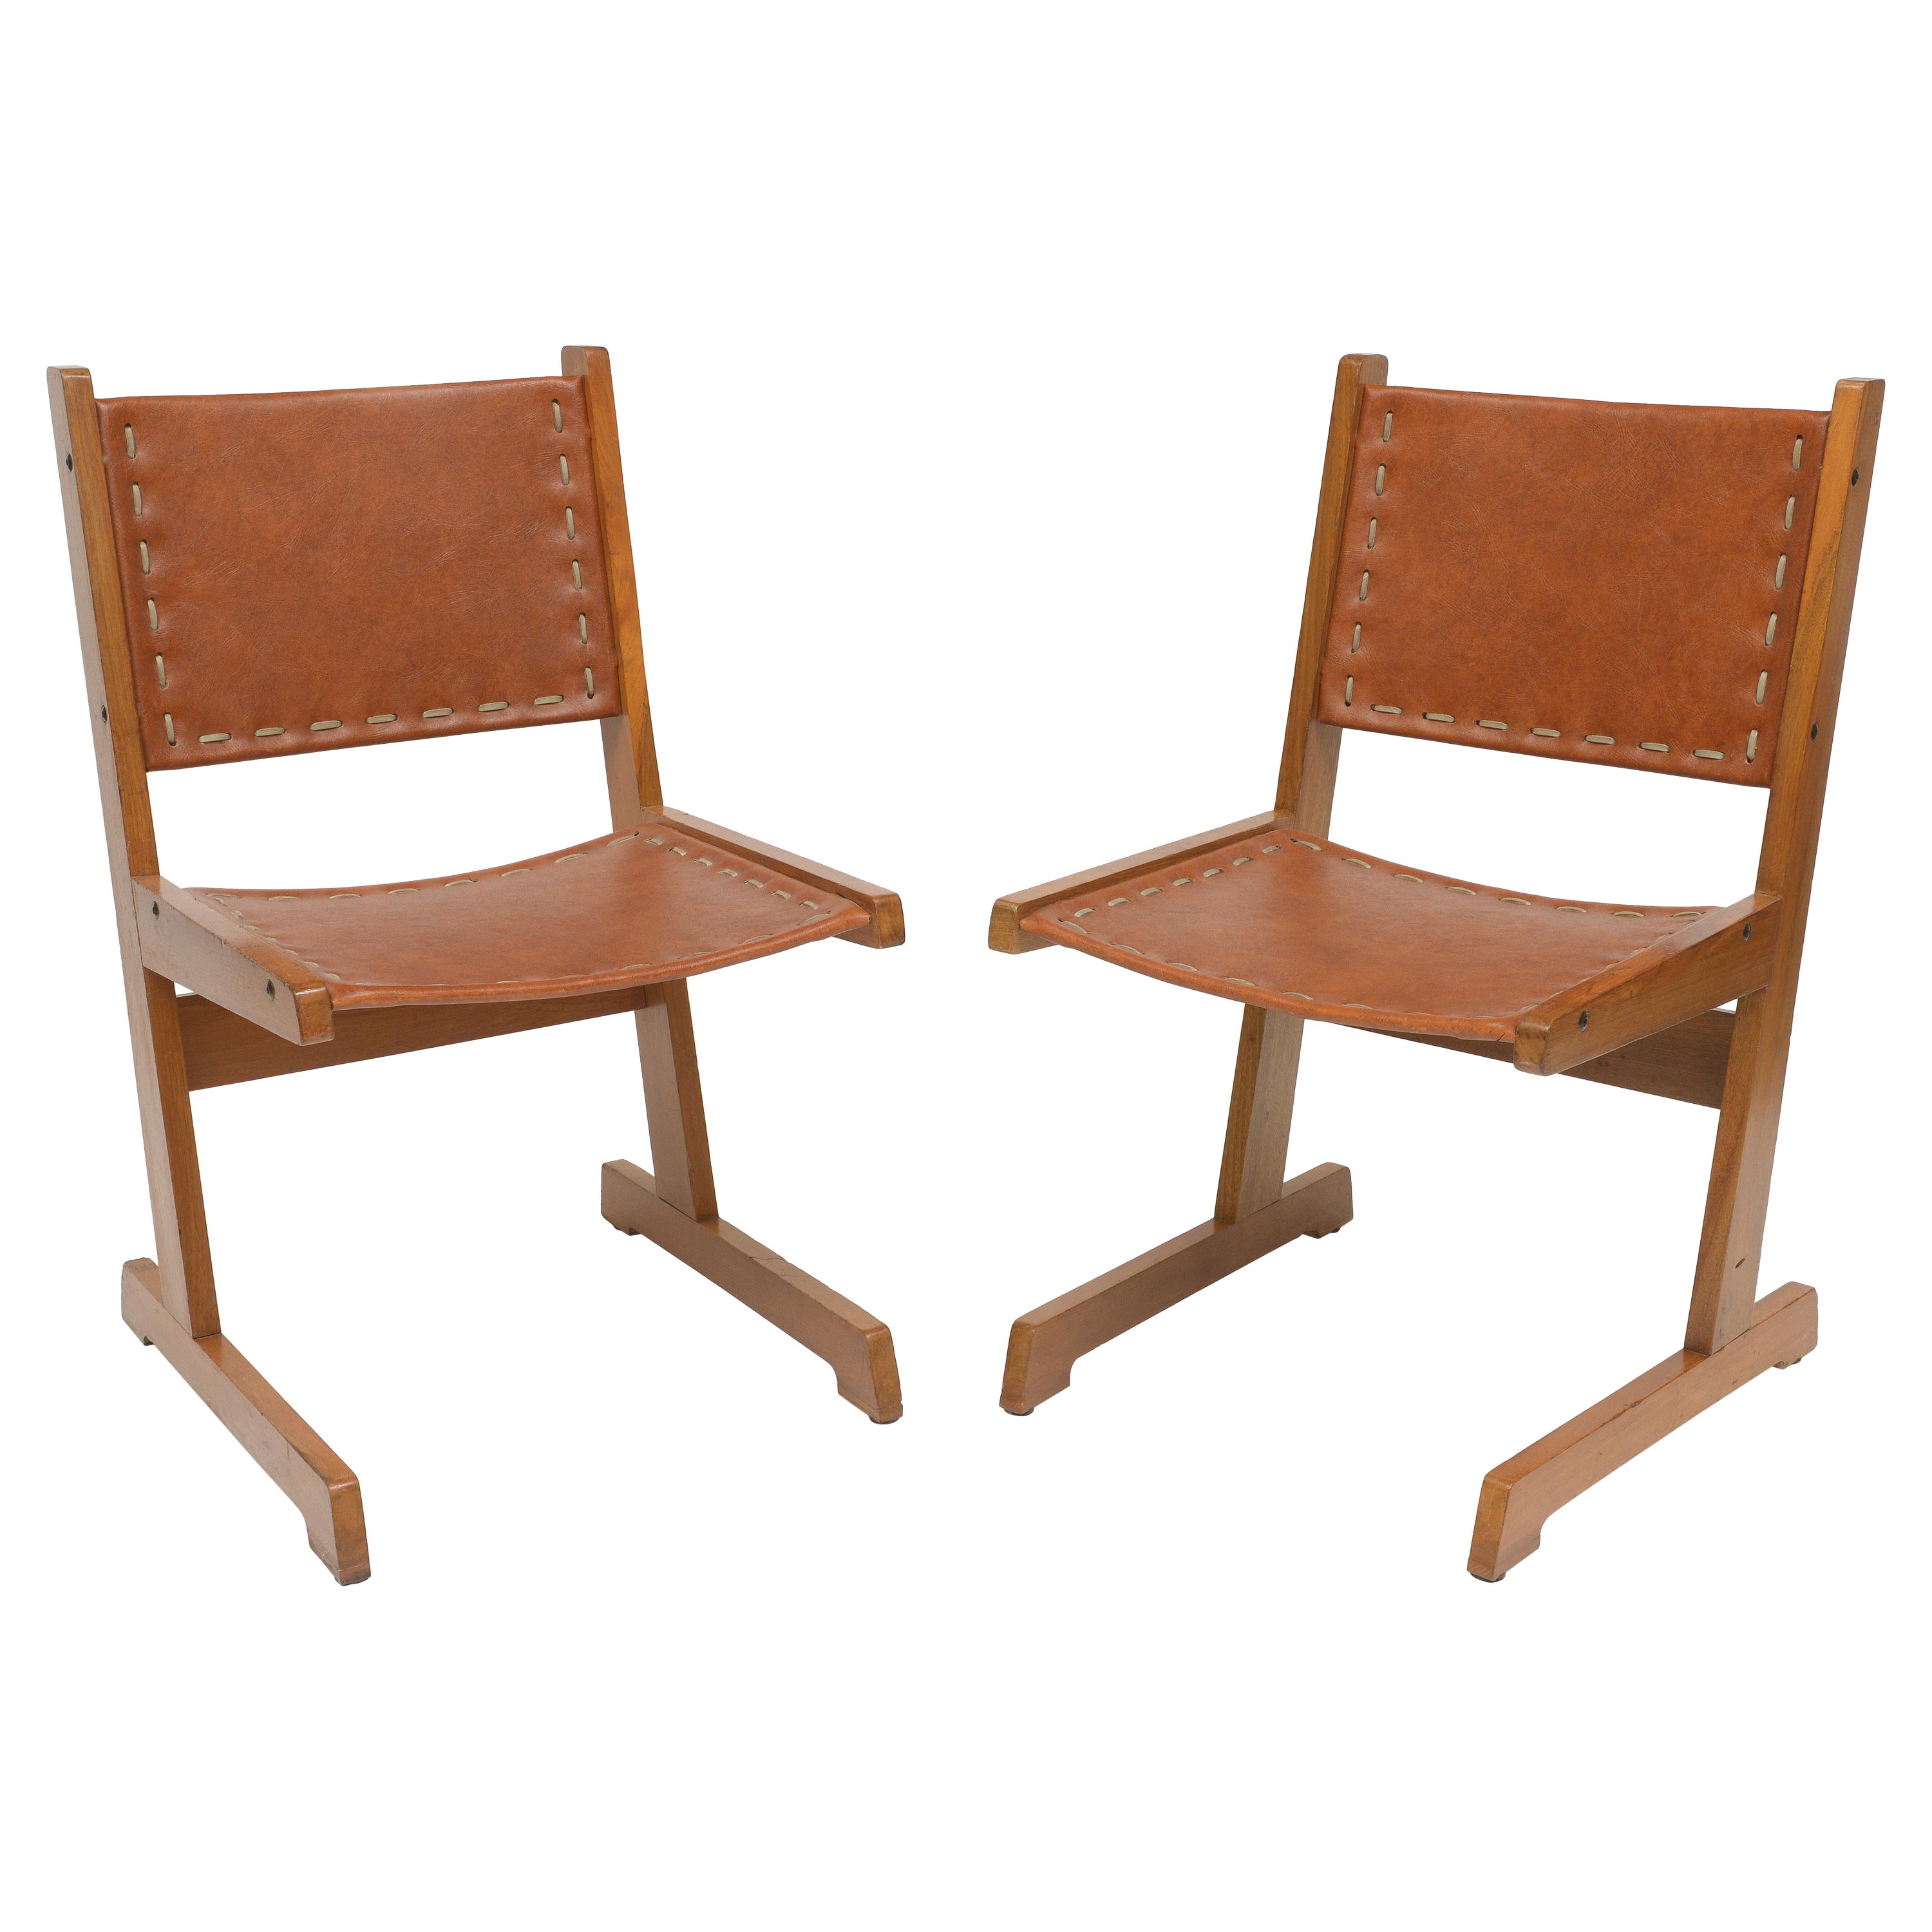 A Pair of Cantilevered Mid-Century Colombian Leather Sling Chairs  For Sale